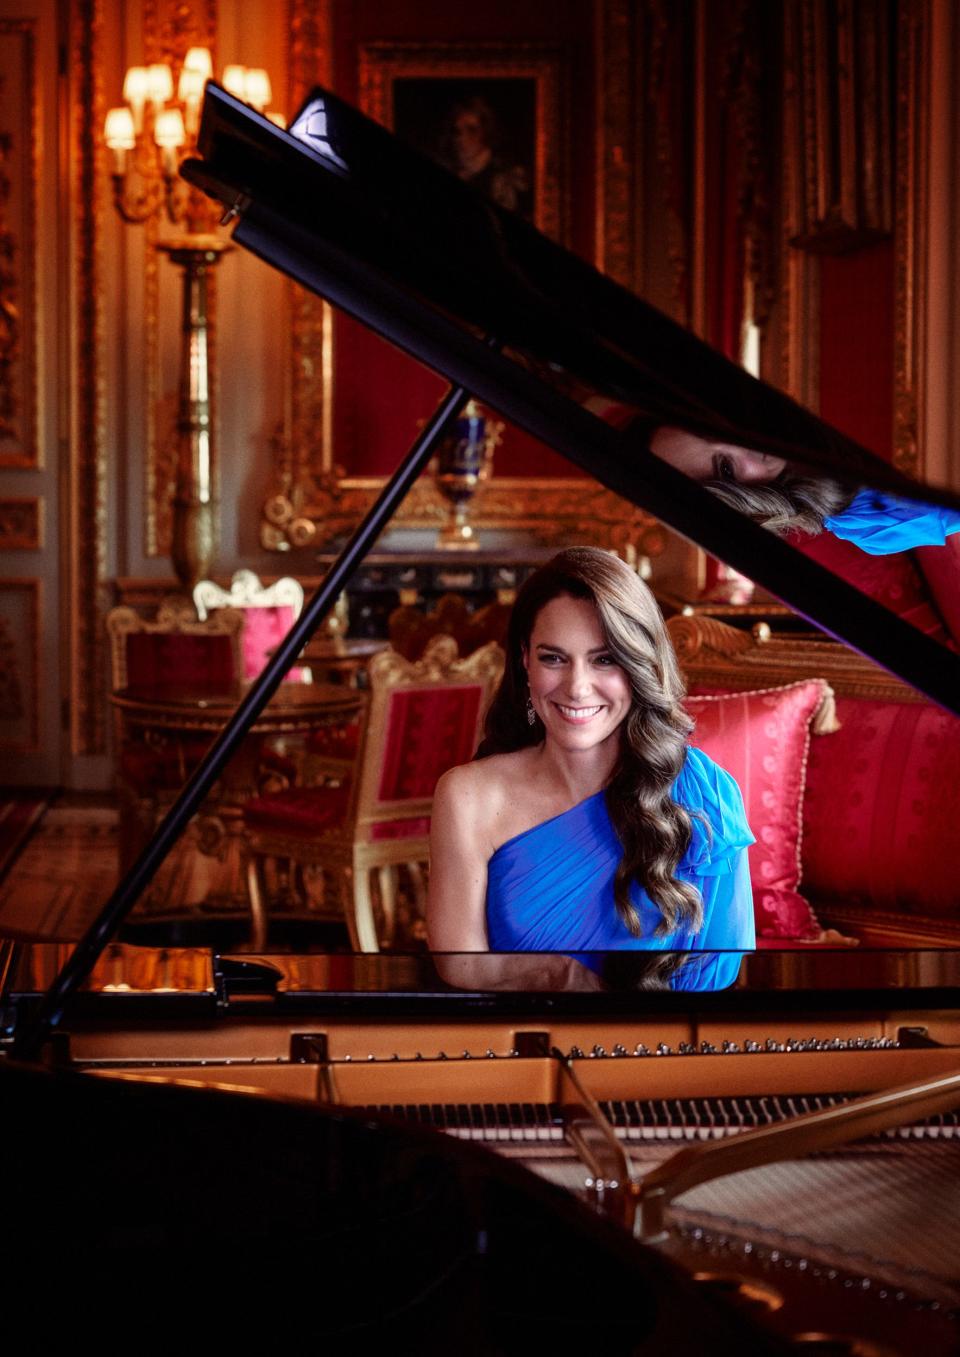 Princess Kate gave a short, instrumental piano performance in the opening sequence for the Eurovision Song Contest Grand Final.